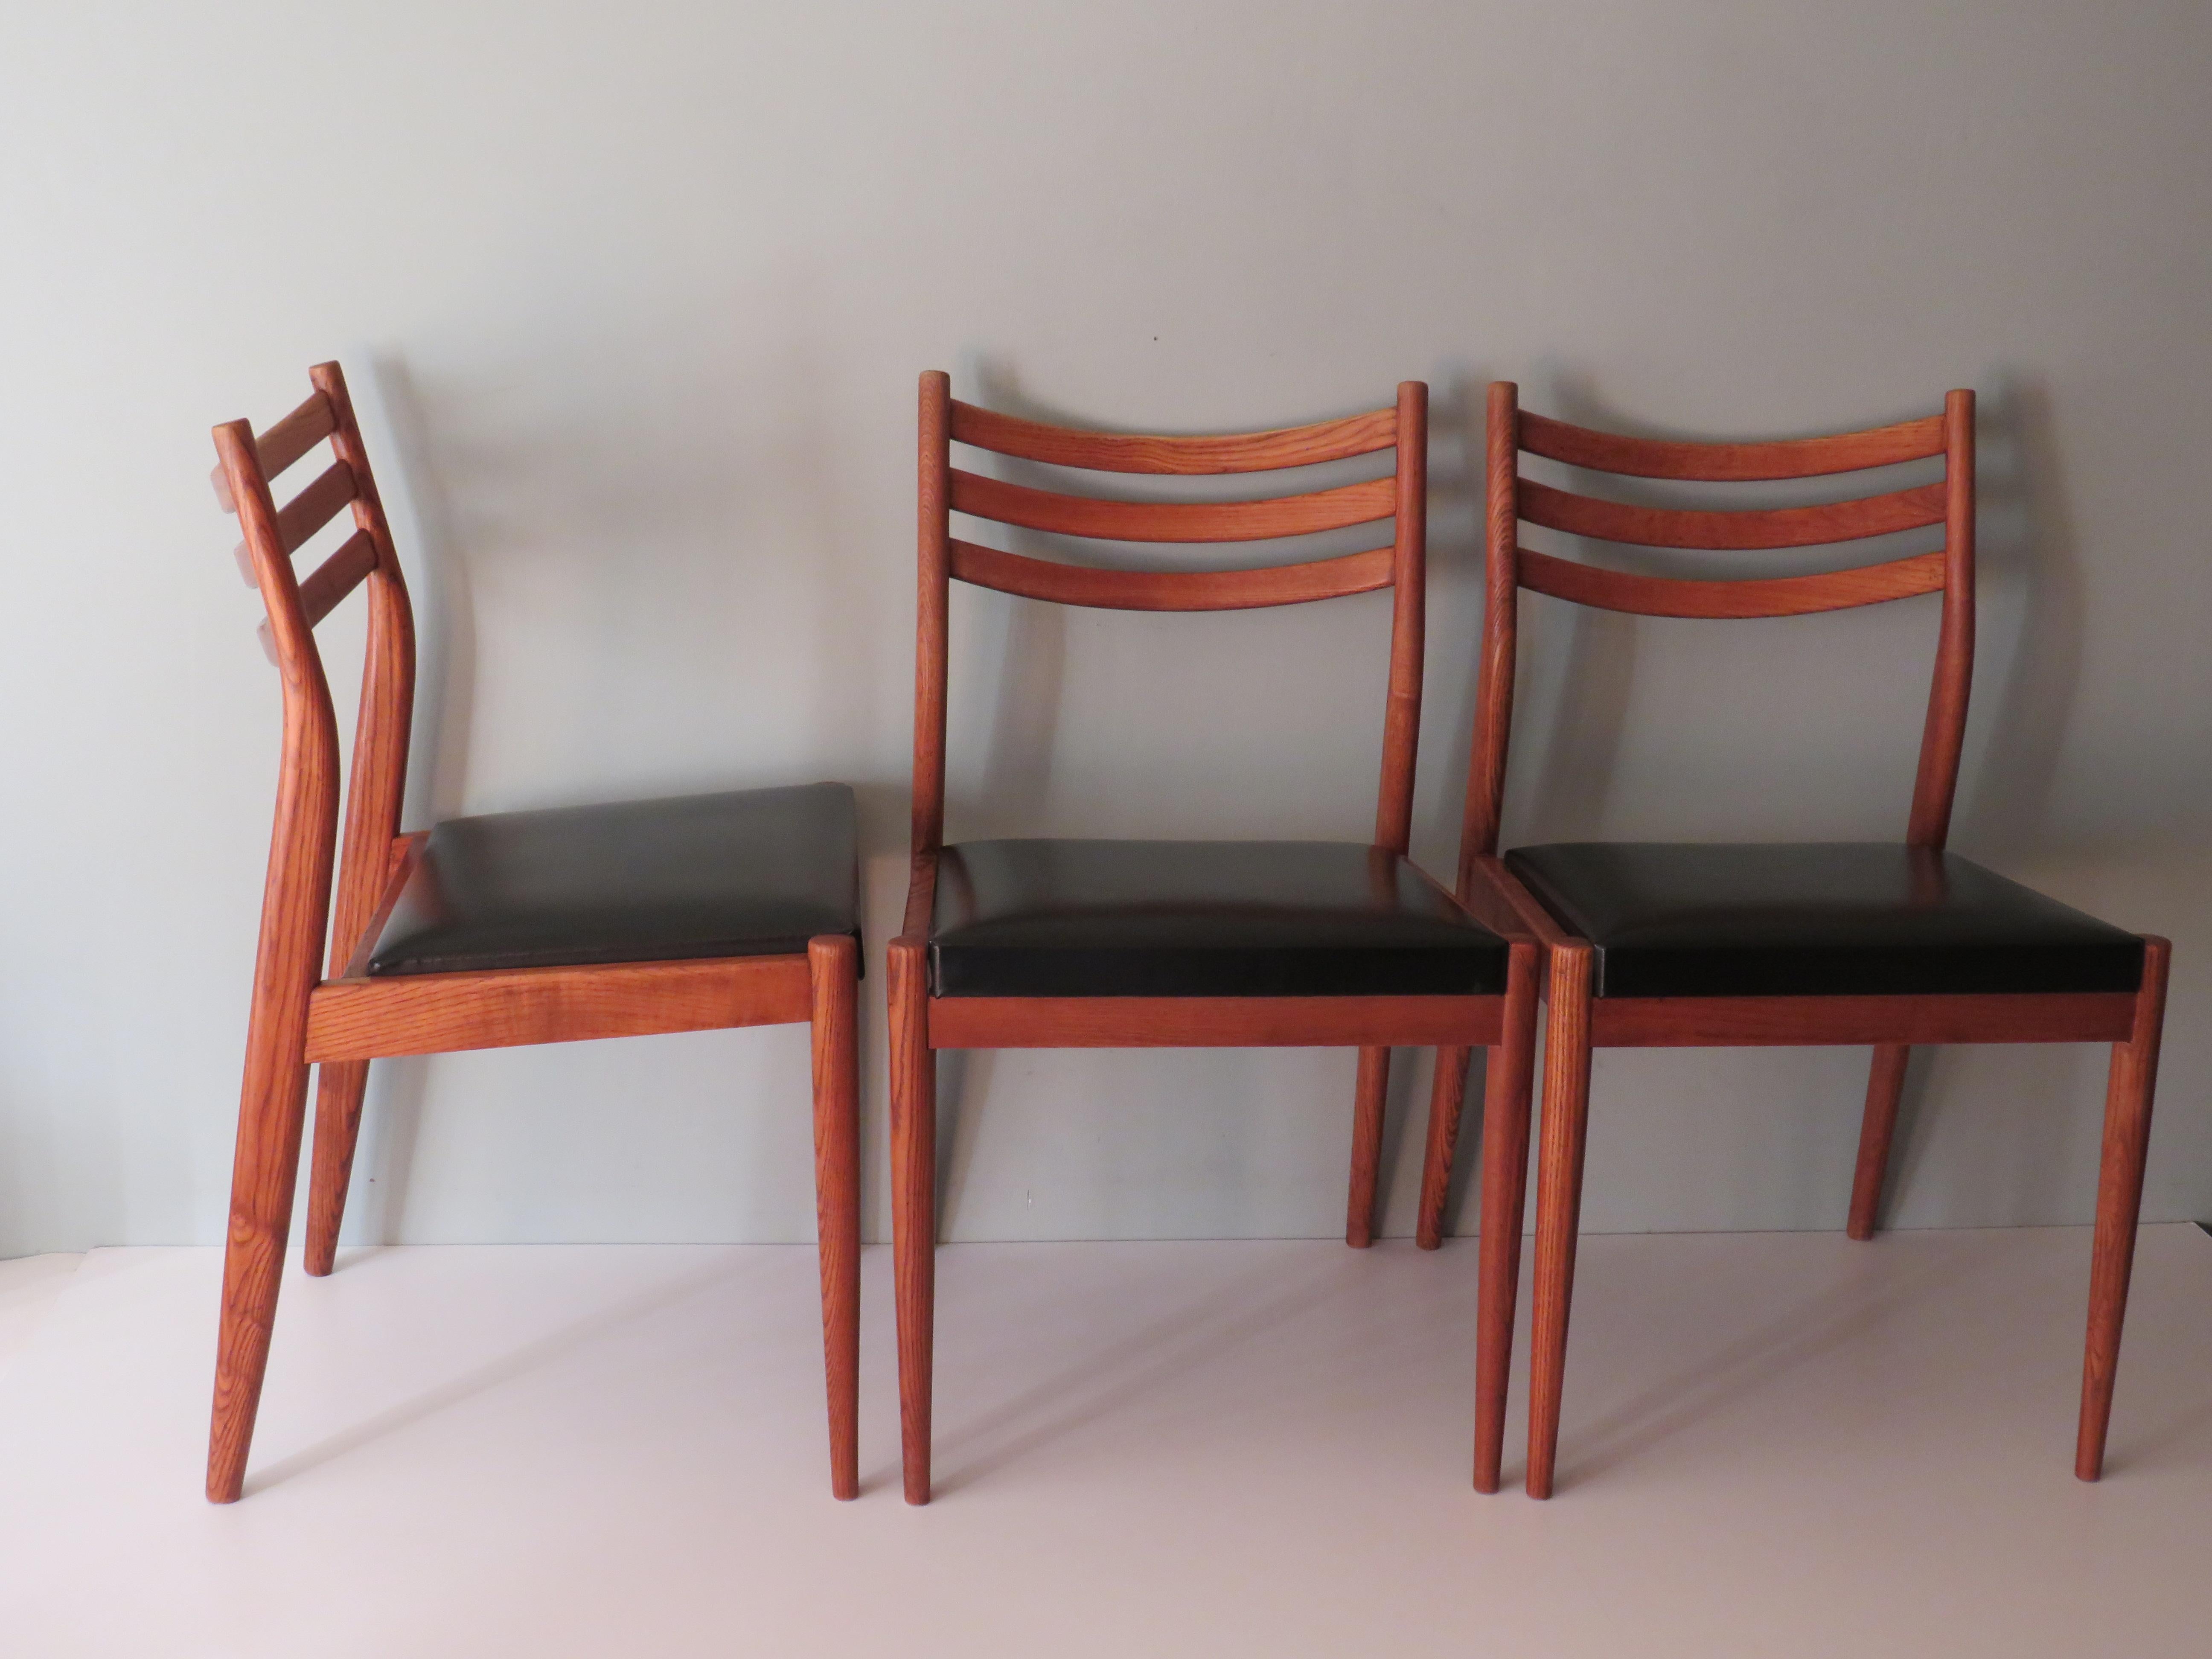 Faux Leather Set of 3 Teak Dining Room Chairs, Danish Design 1960-1970 For Sale